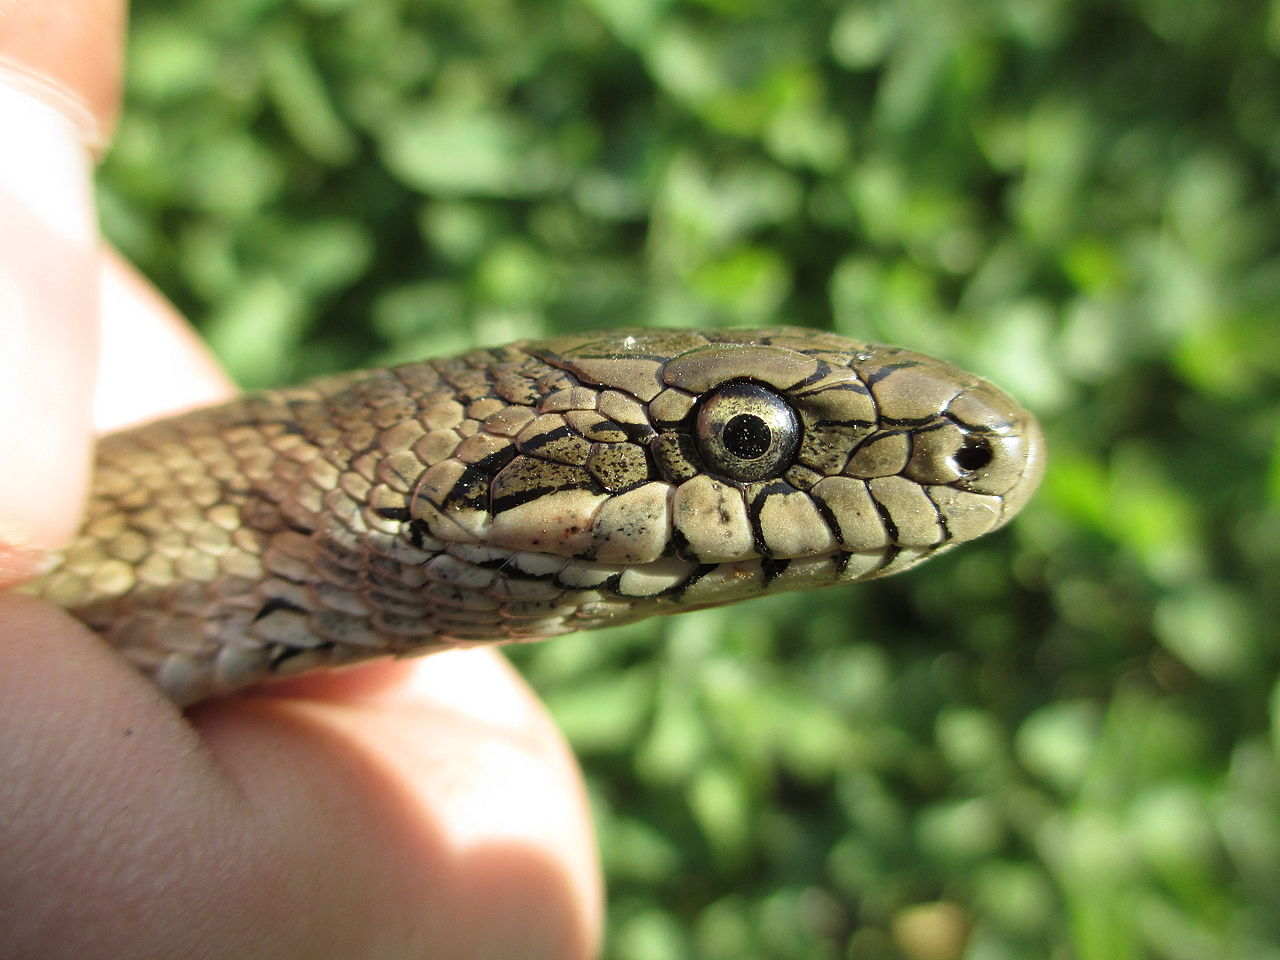 Dione's Rat Snake in close up